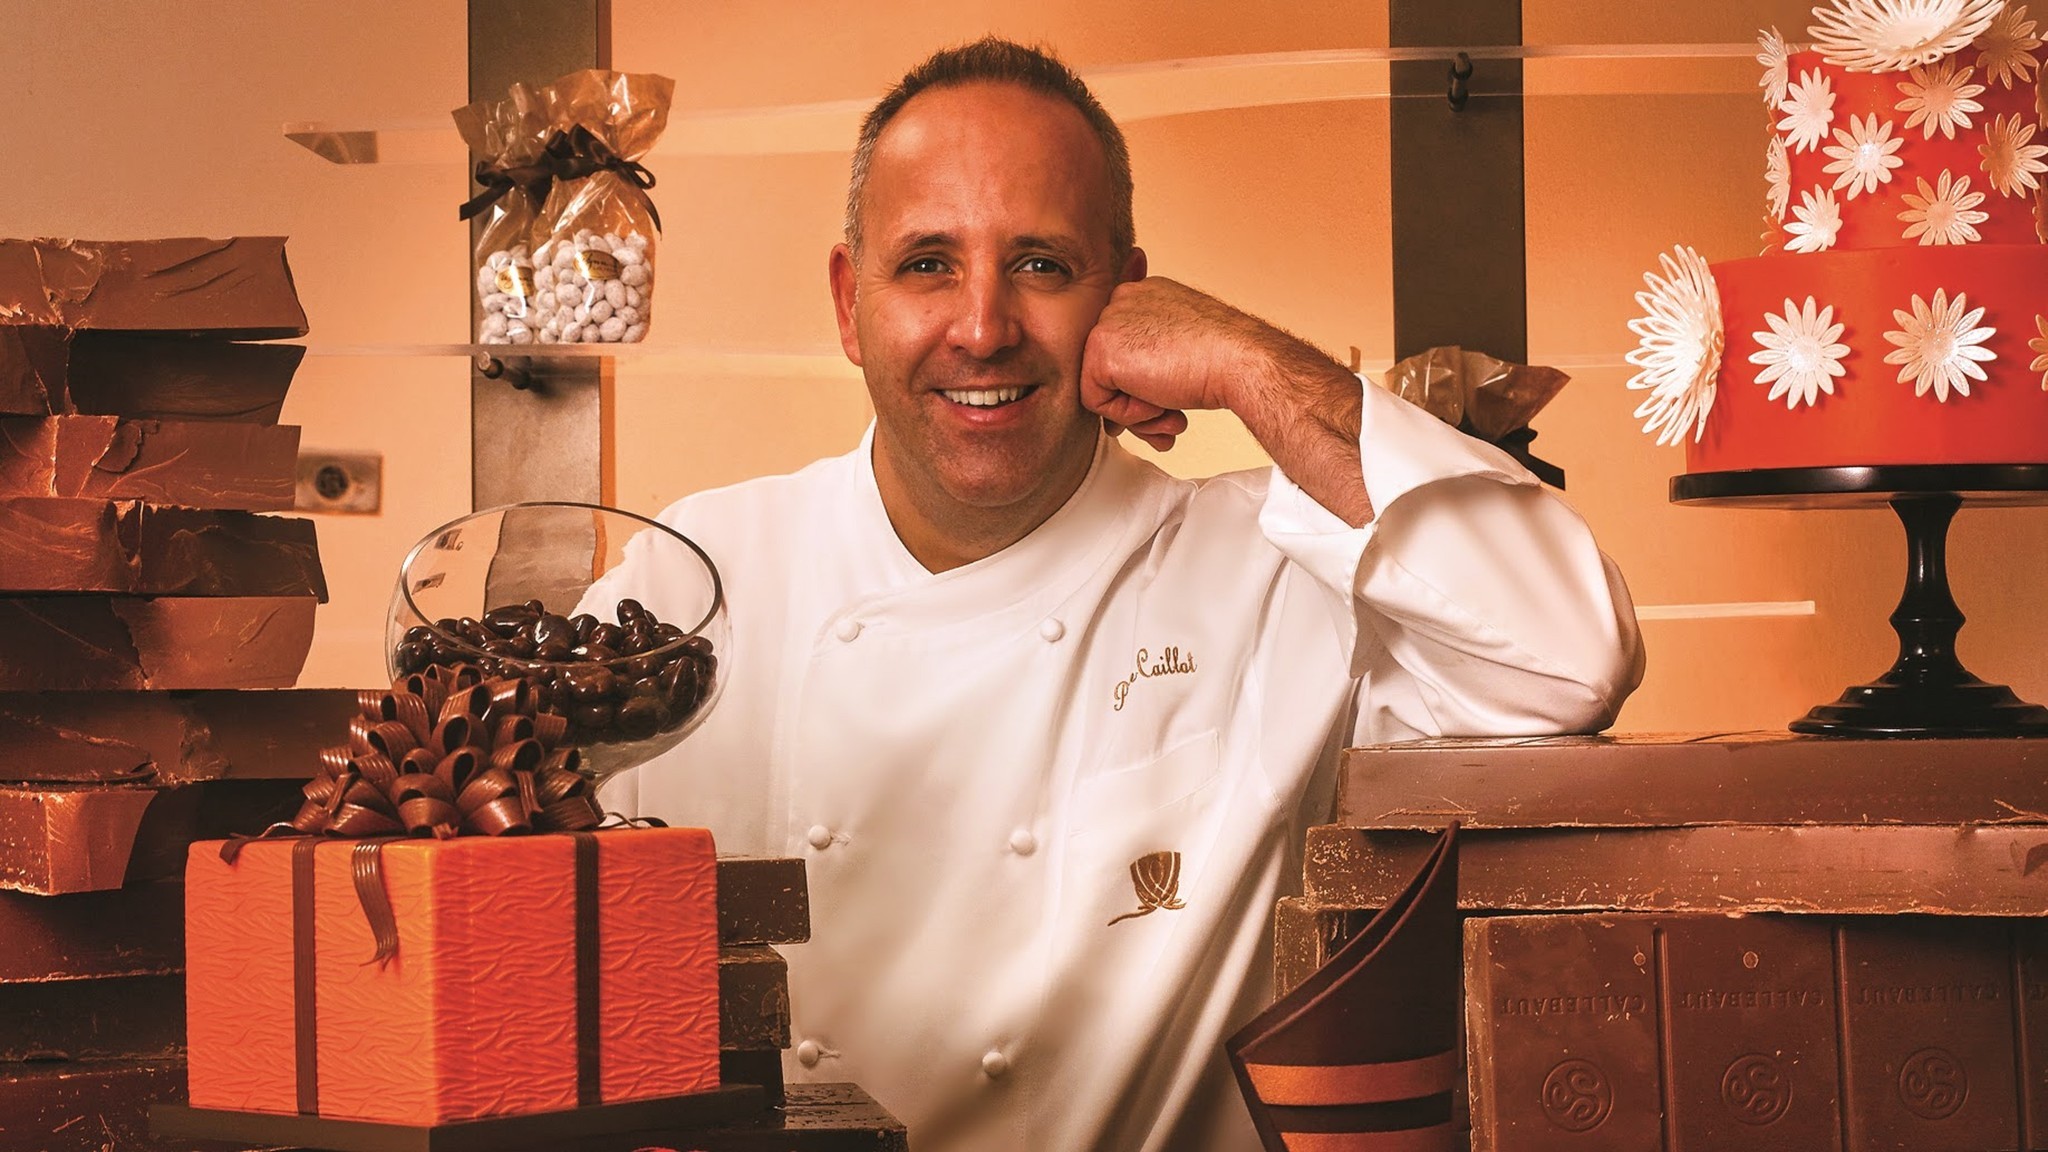 Executive pastry chef Patrice Caillot will teach participants the basics of chocolate making during a Dec. 7 master class.